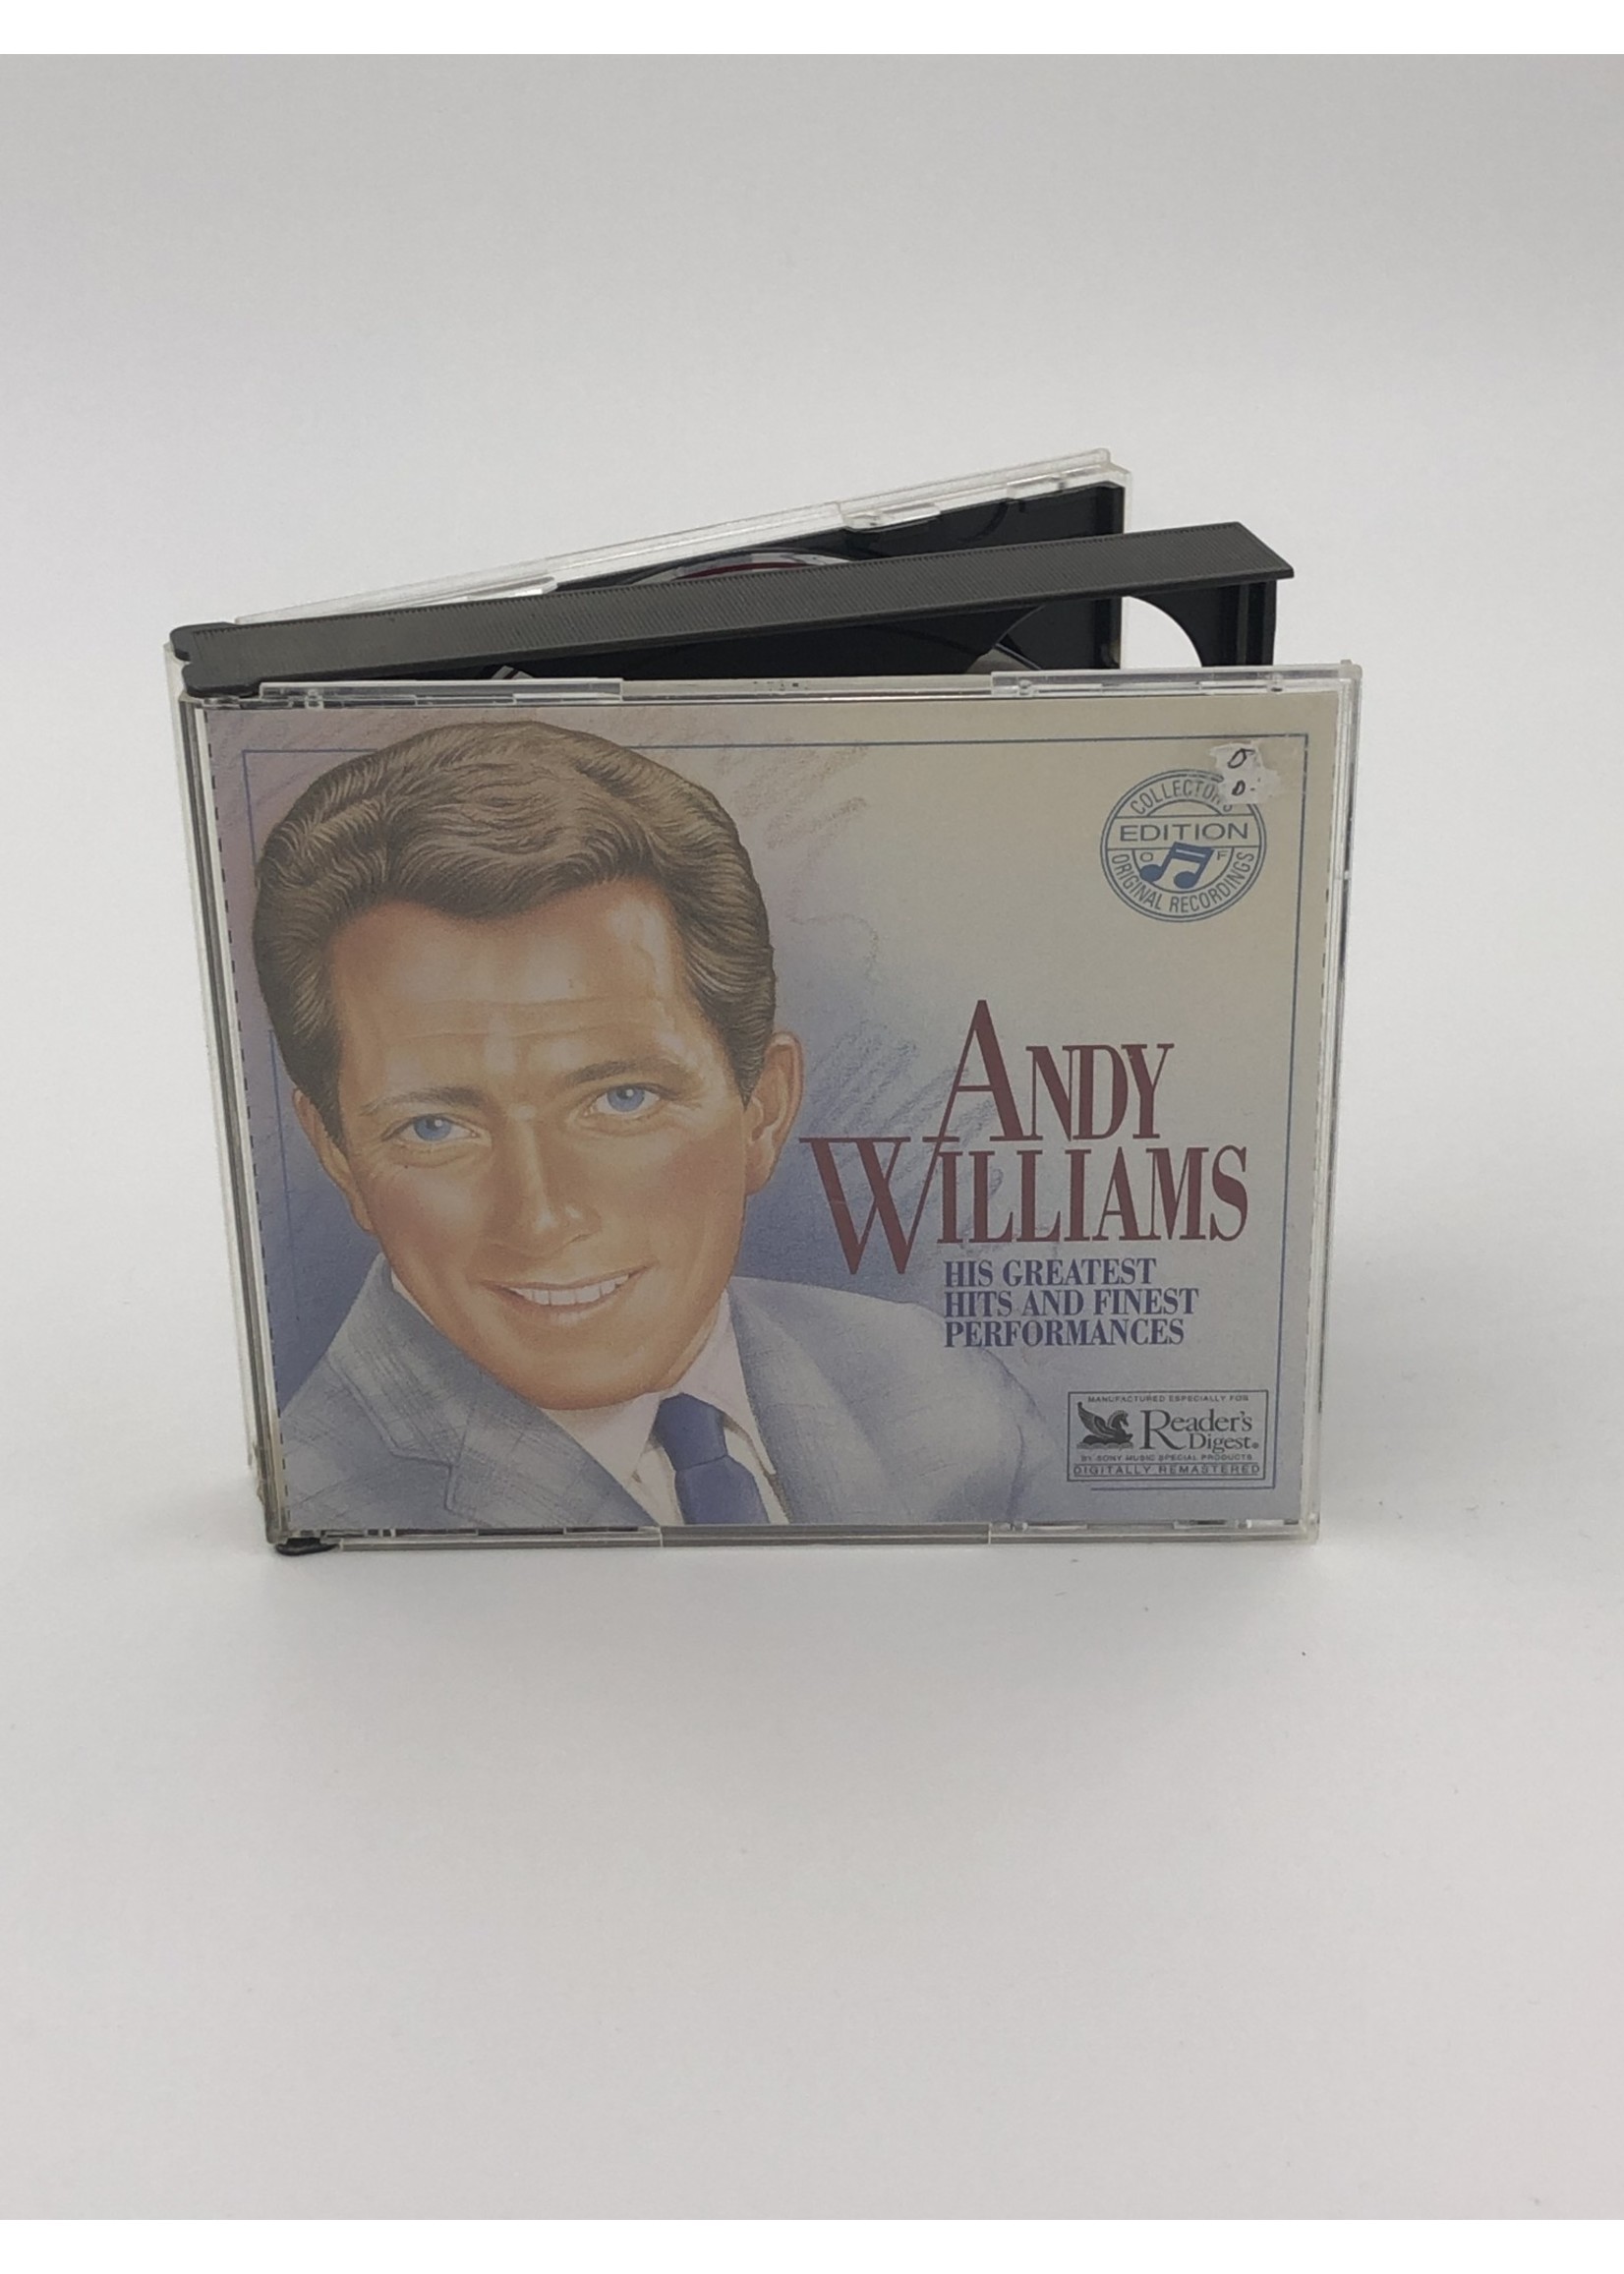 CD Andy Williams His Greatest Hits and Finest Performances 3 CD